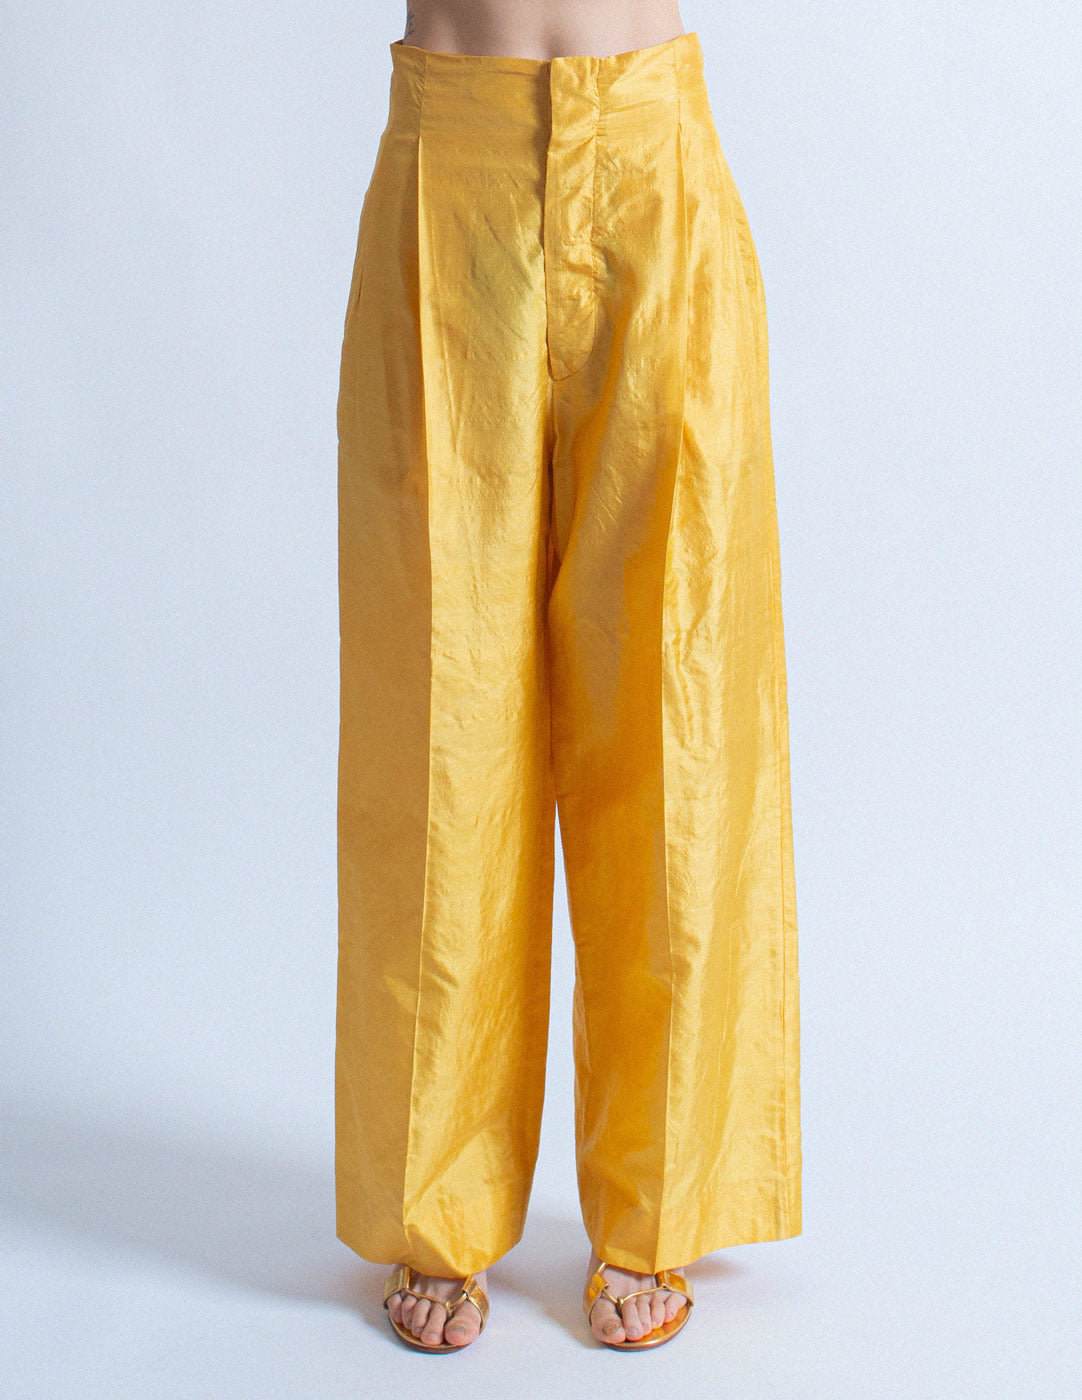 Romeo Gigli vintage marigold high waisted silk trousers front detail